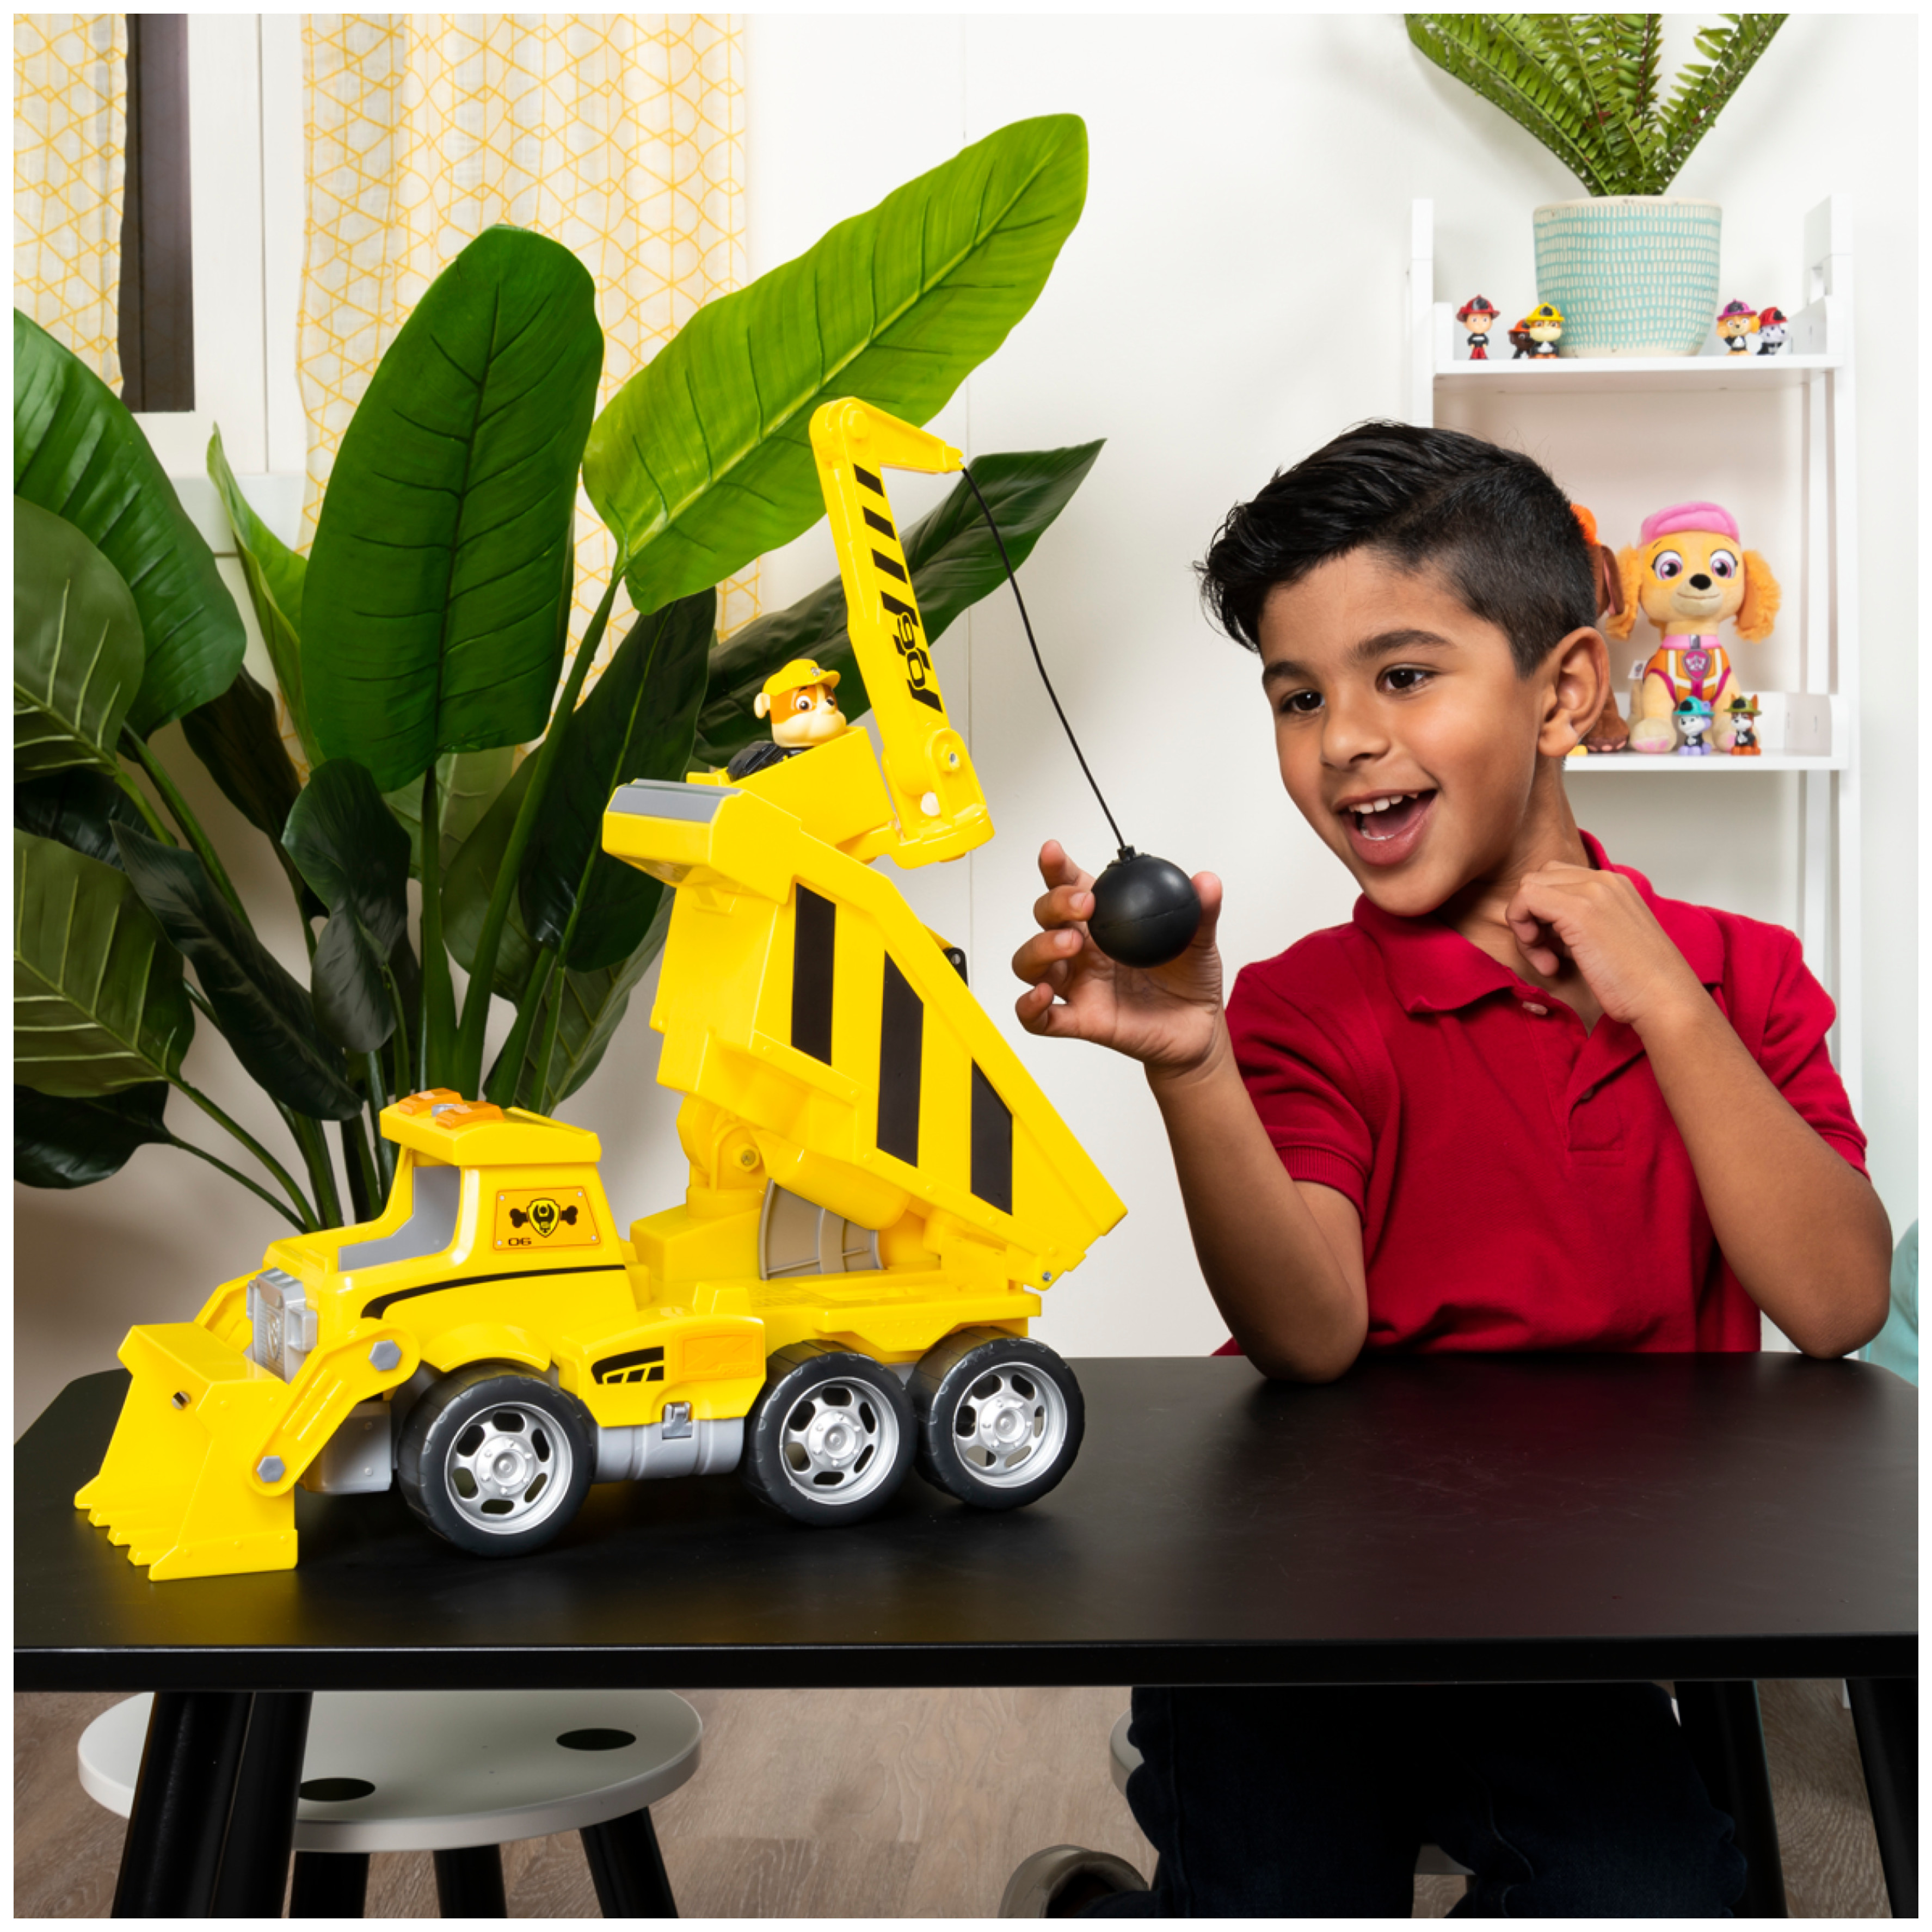 PAW Patrol, Rubble's Construction Truck with Mini Vehicle and Figure, For Ages 3 and up - image 5 of 8